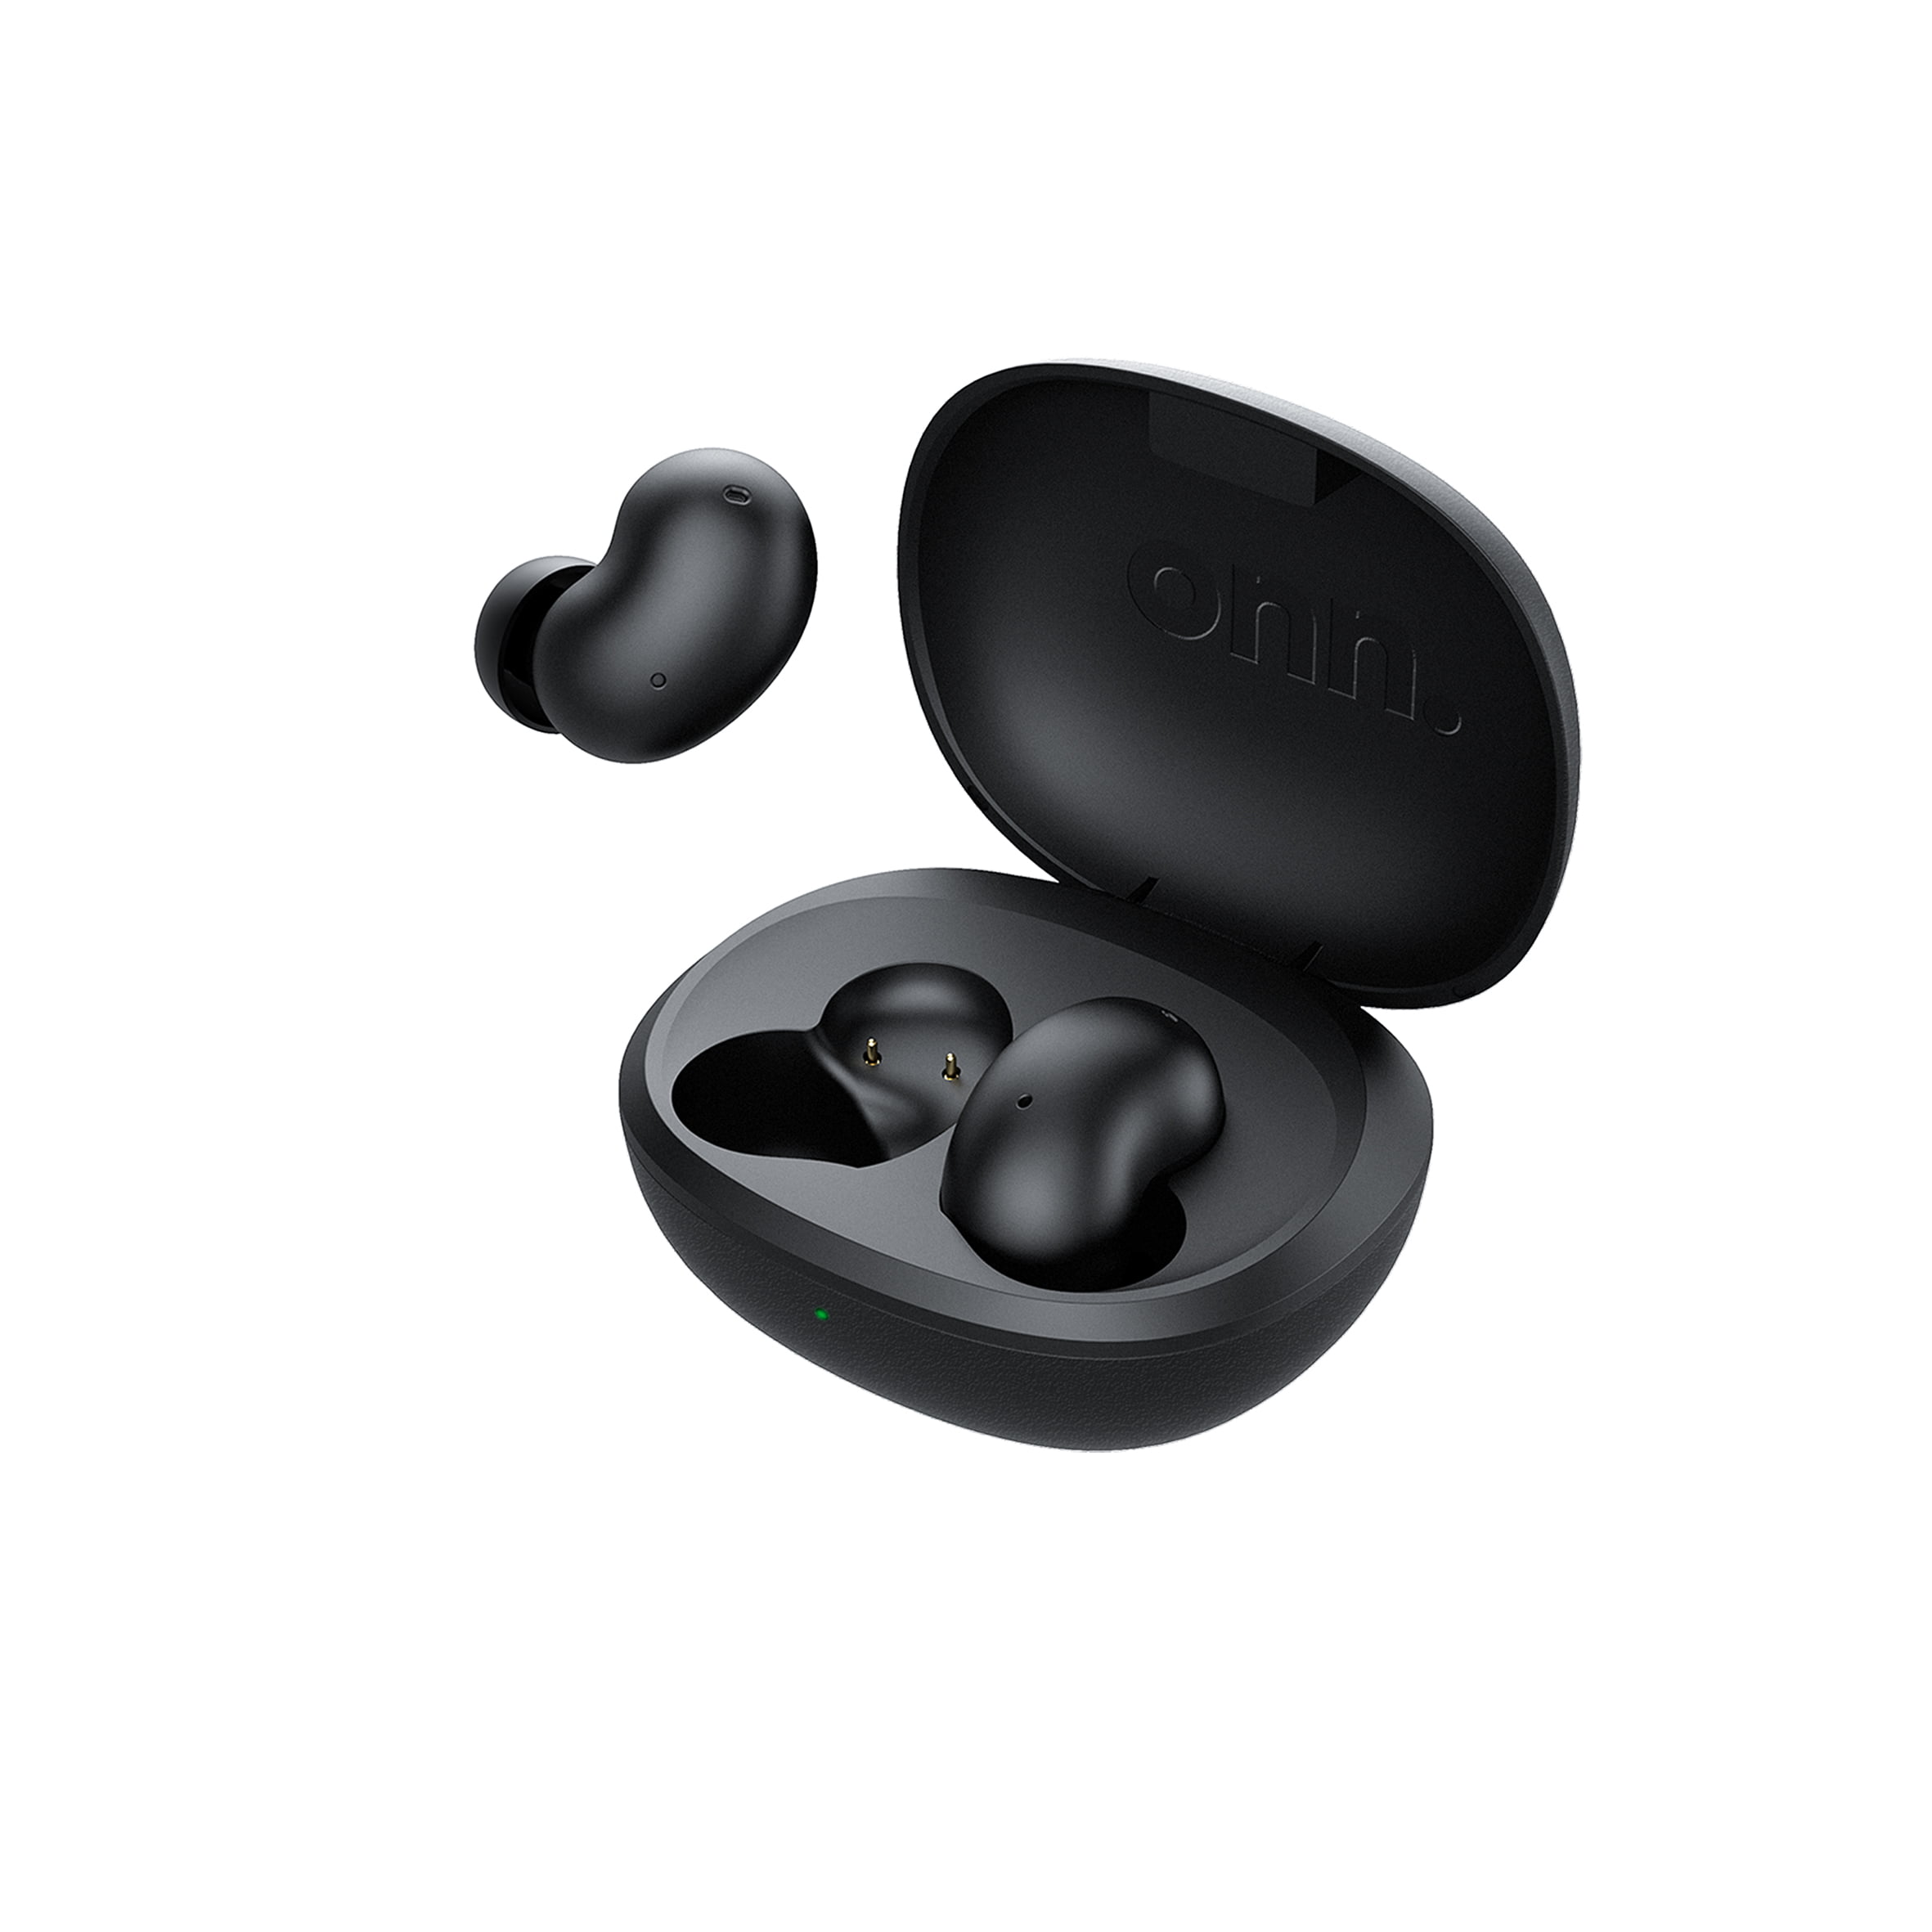 How to Troubleshoot Your ONN Bluetooth Earbuds That Won't Turn On? 15